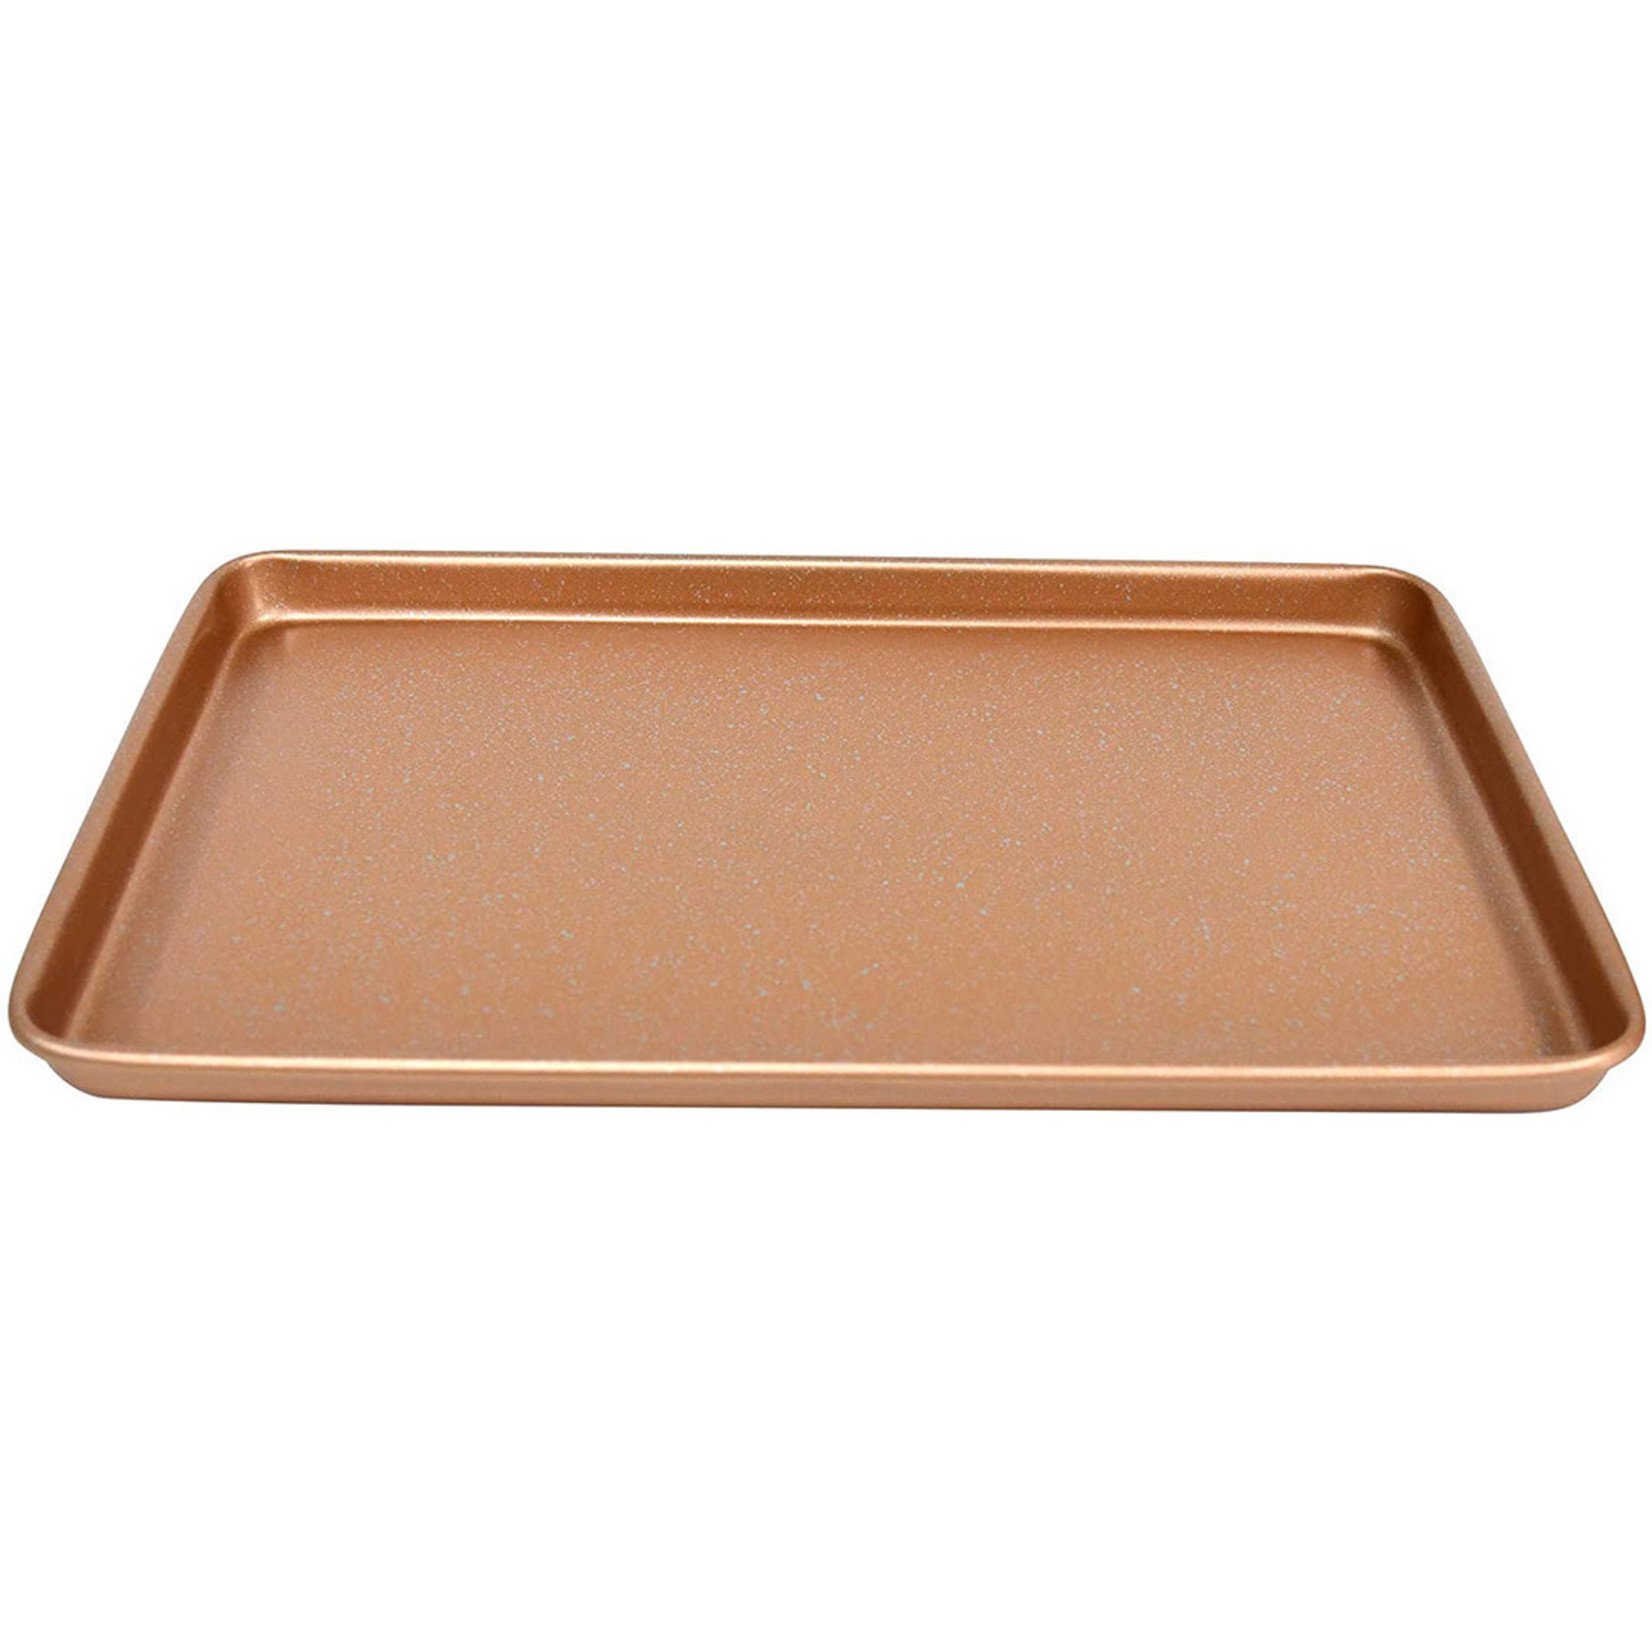 Cookie Sheet Ultimage - 15” x 10” - Rose Gold - The Fancy Frog